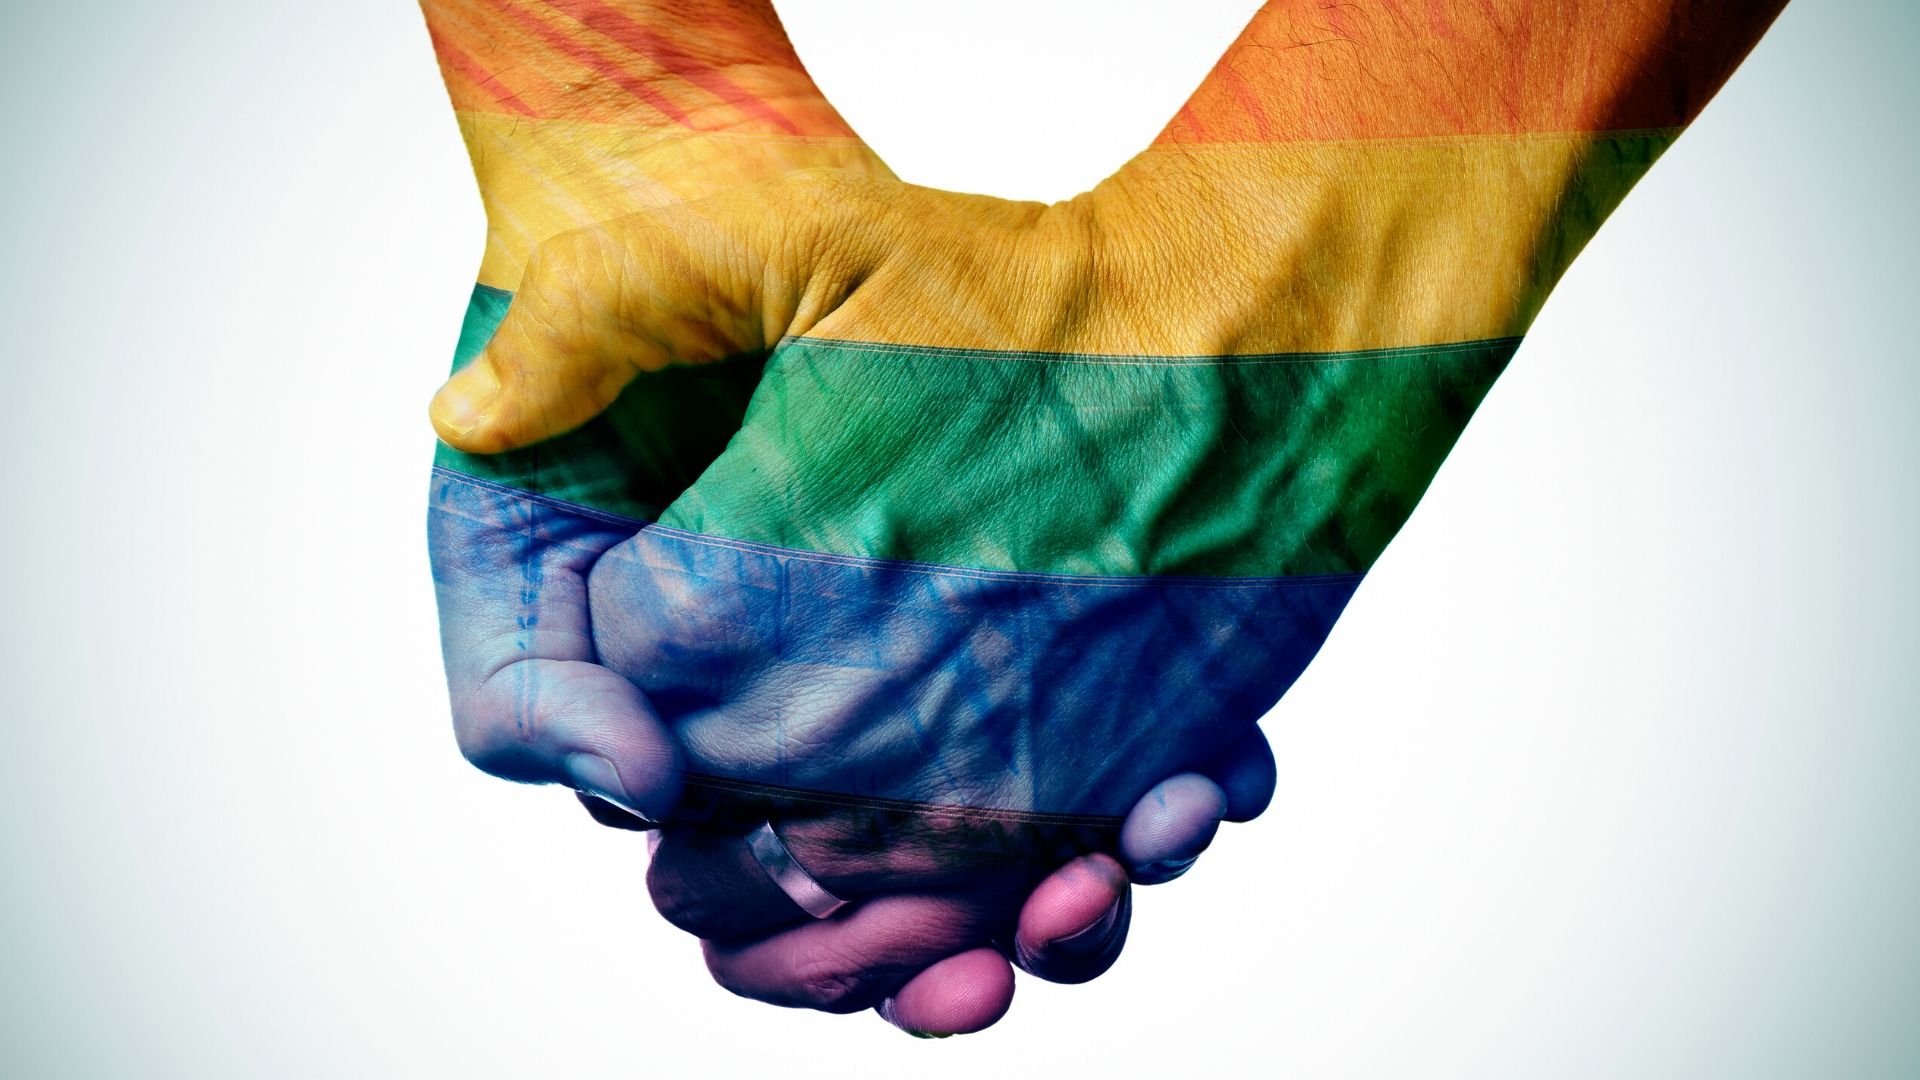 Two hands clasped together with the hands and arms painted in the pride flag